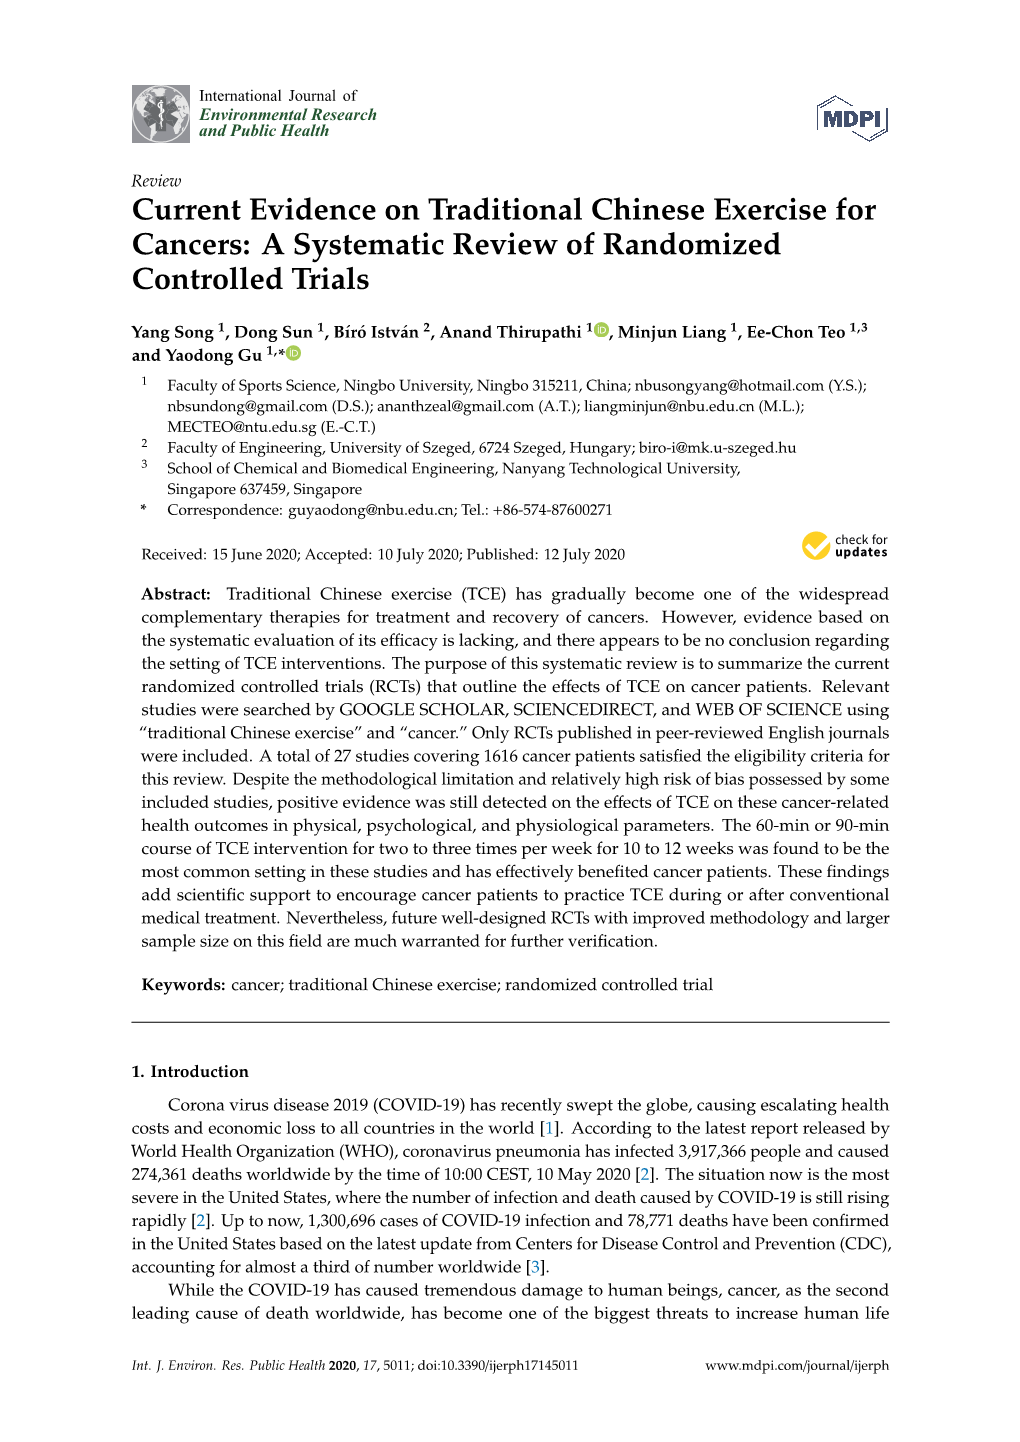 Current Evidence on Traditional Chinese Exercise for Cancers: a Systematic Review of Randomized Controlled Trials